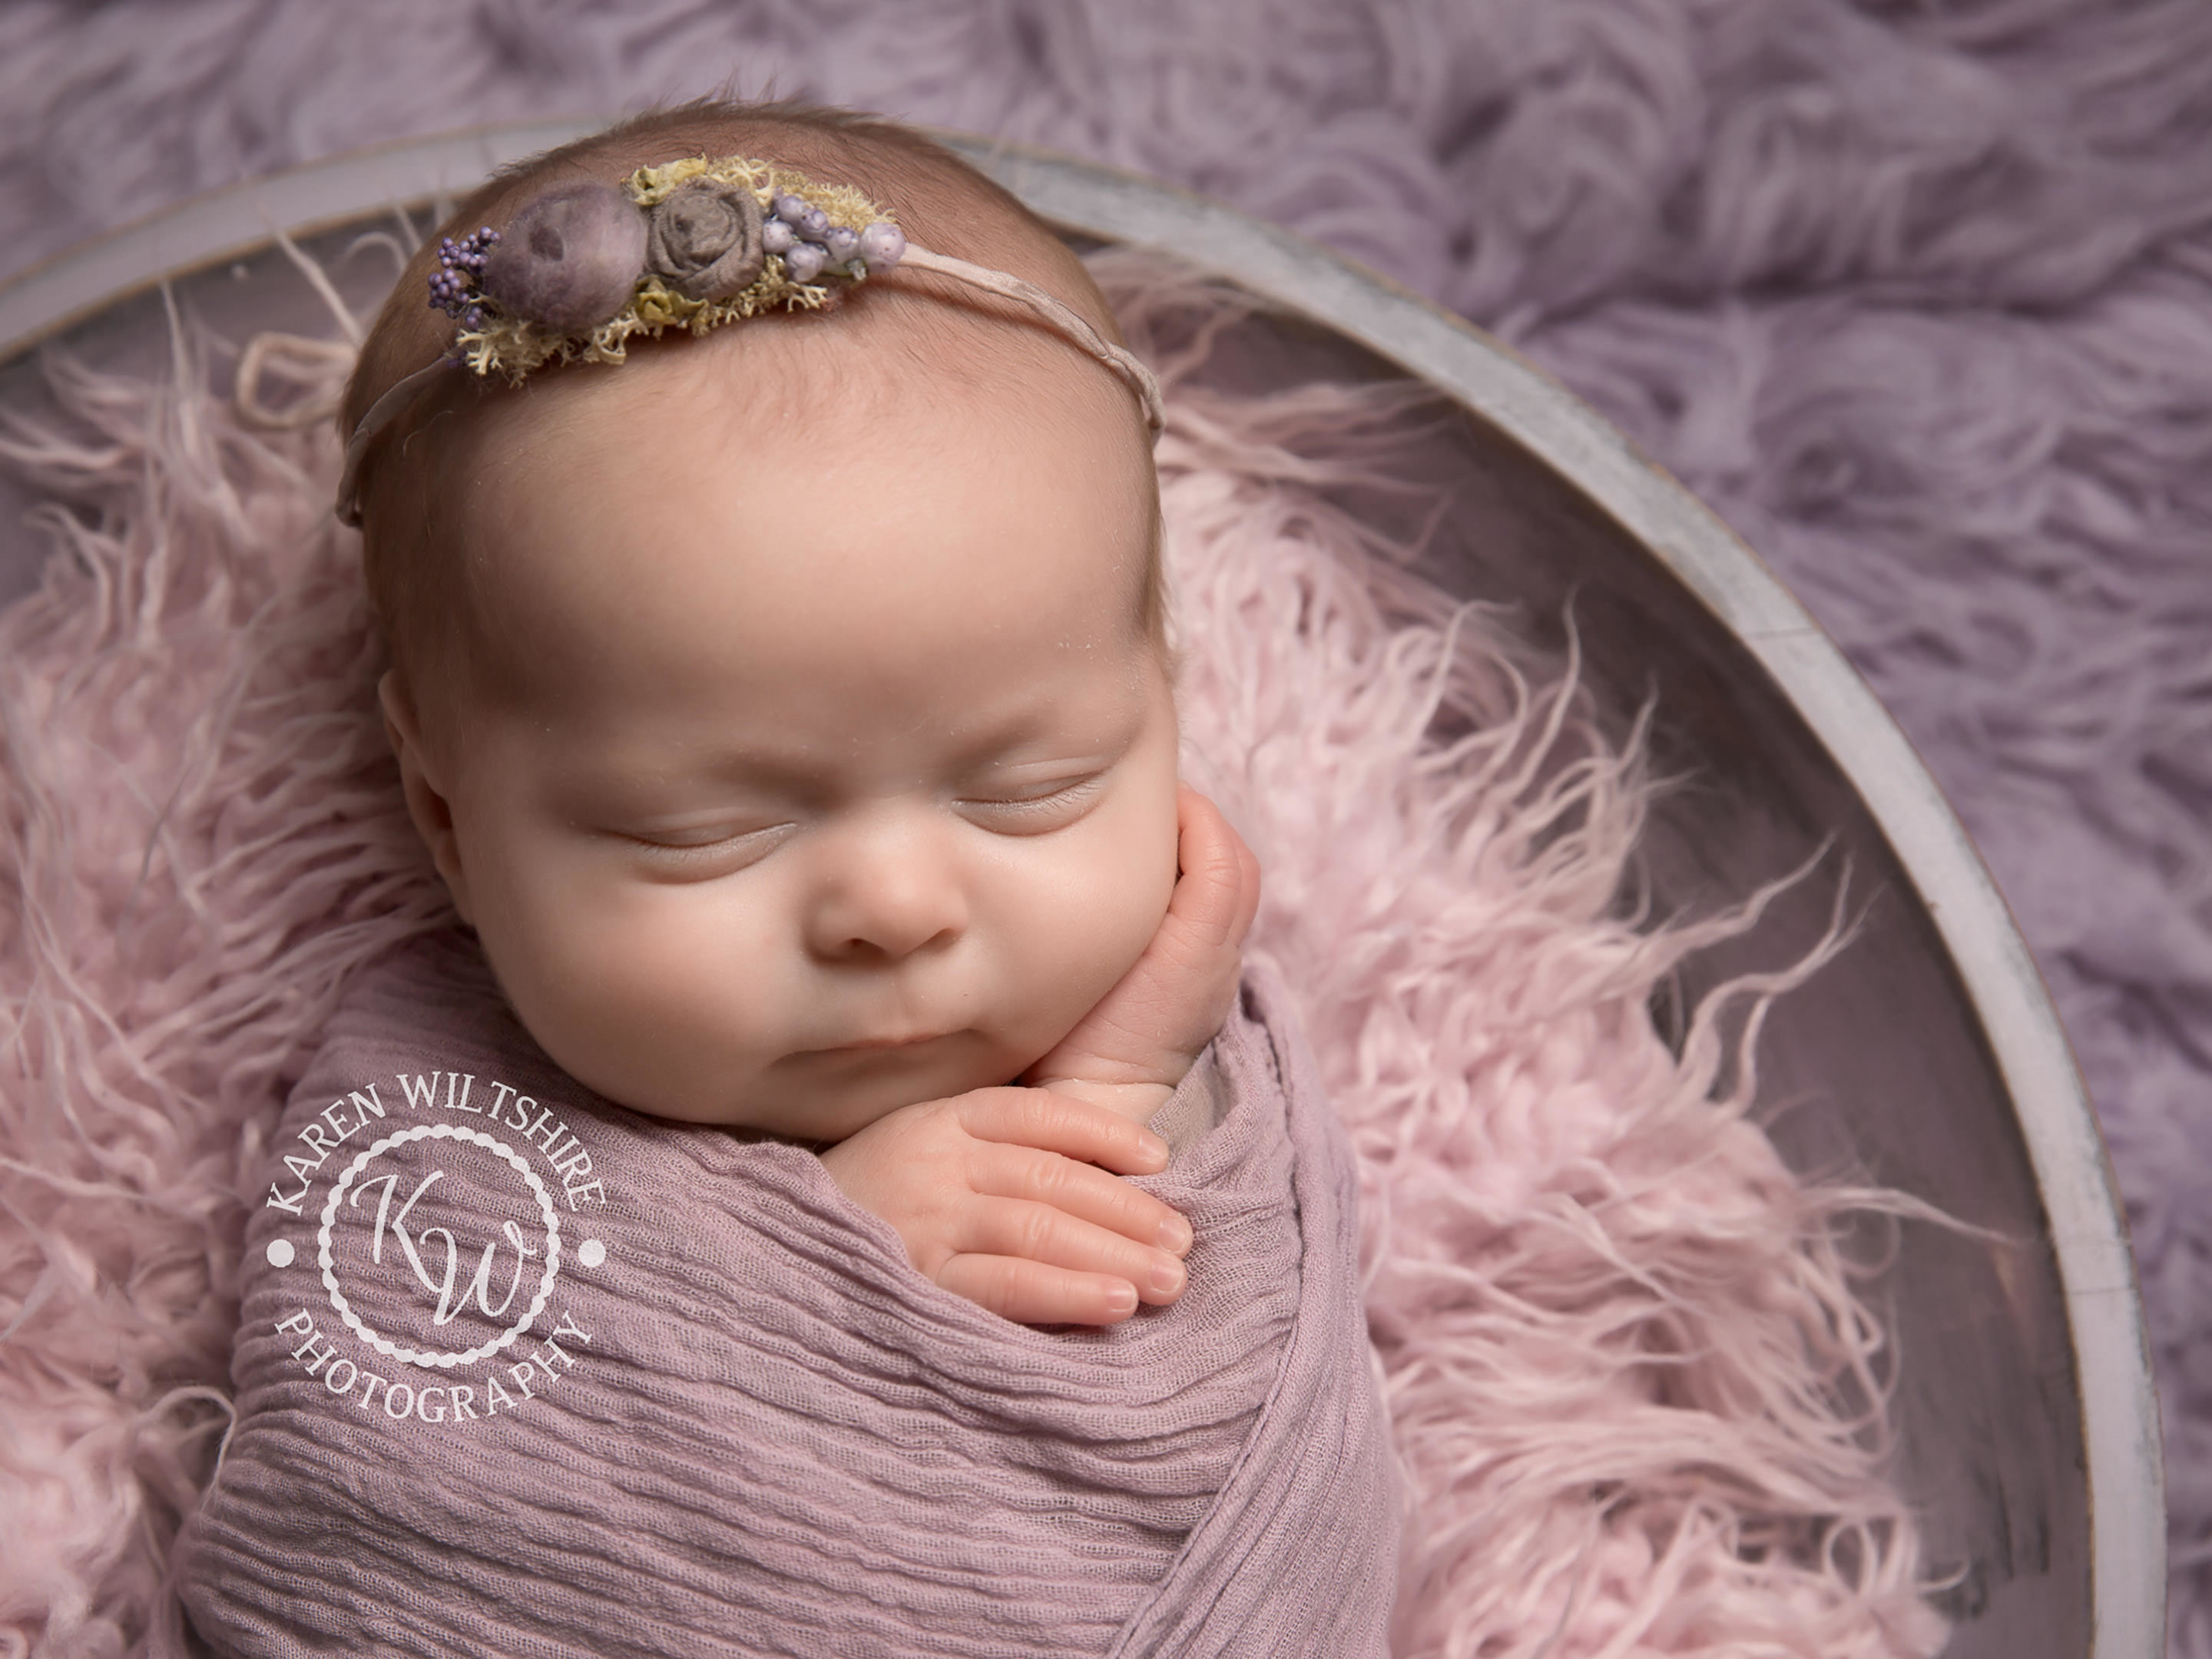 How old should a baby be at their newborn baby photoshoot?